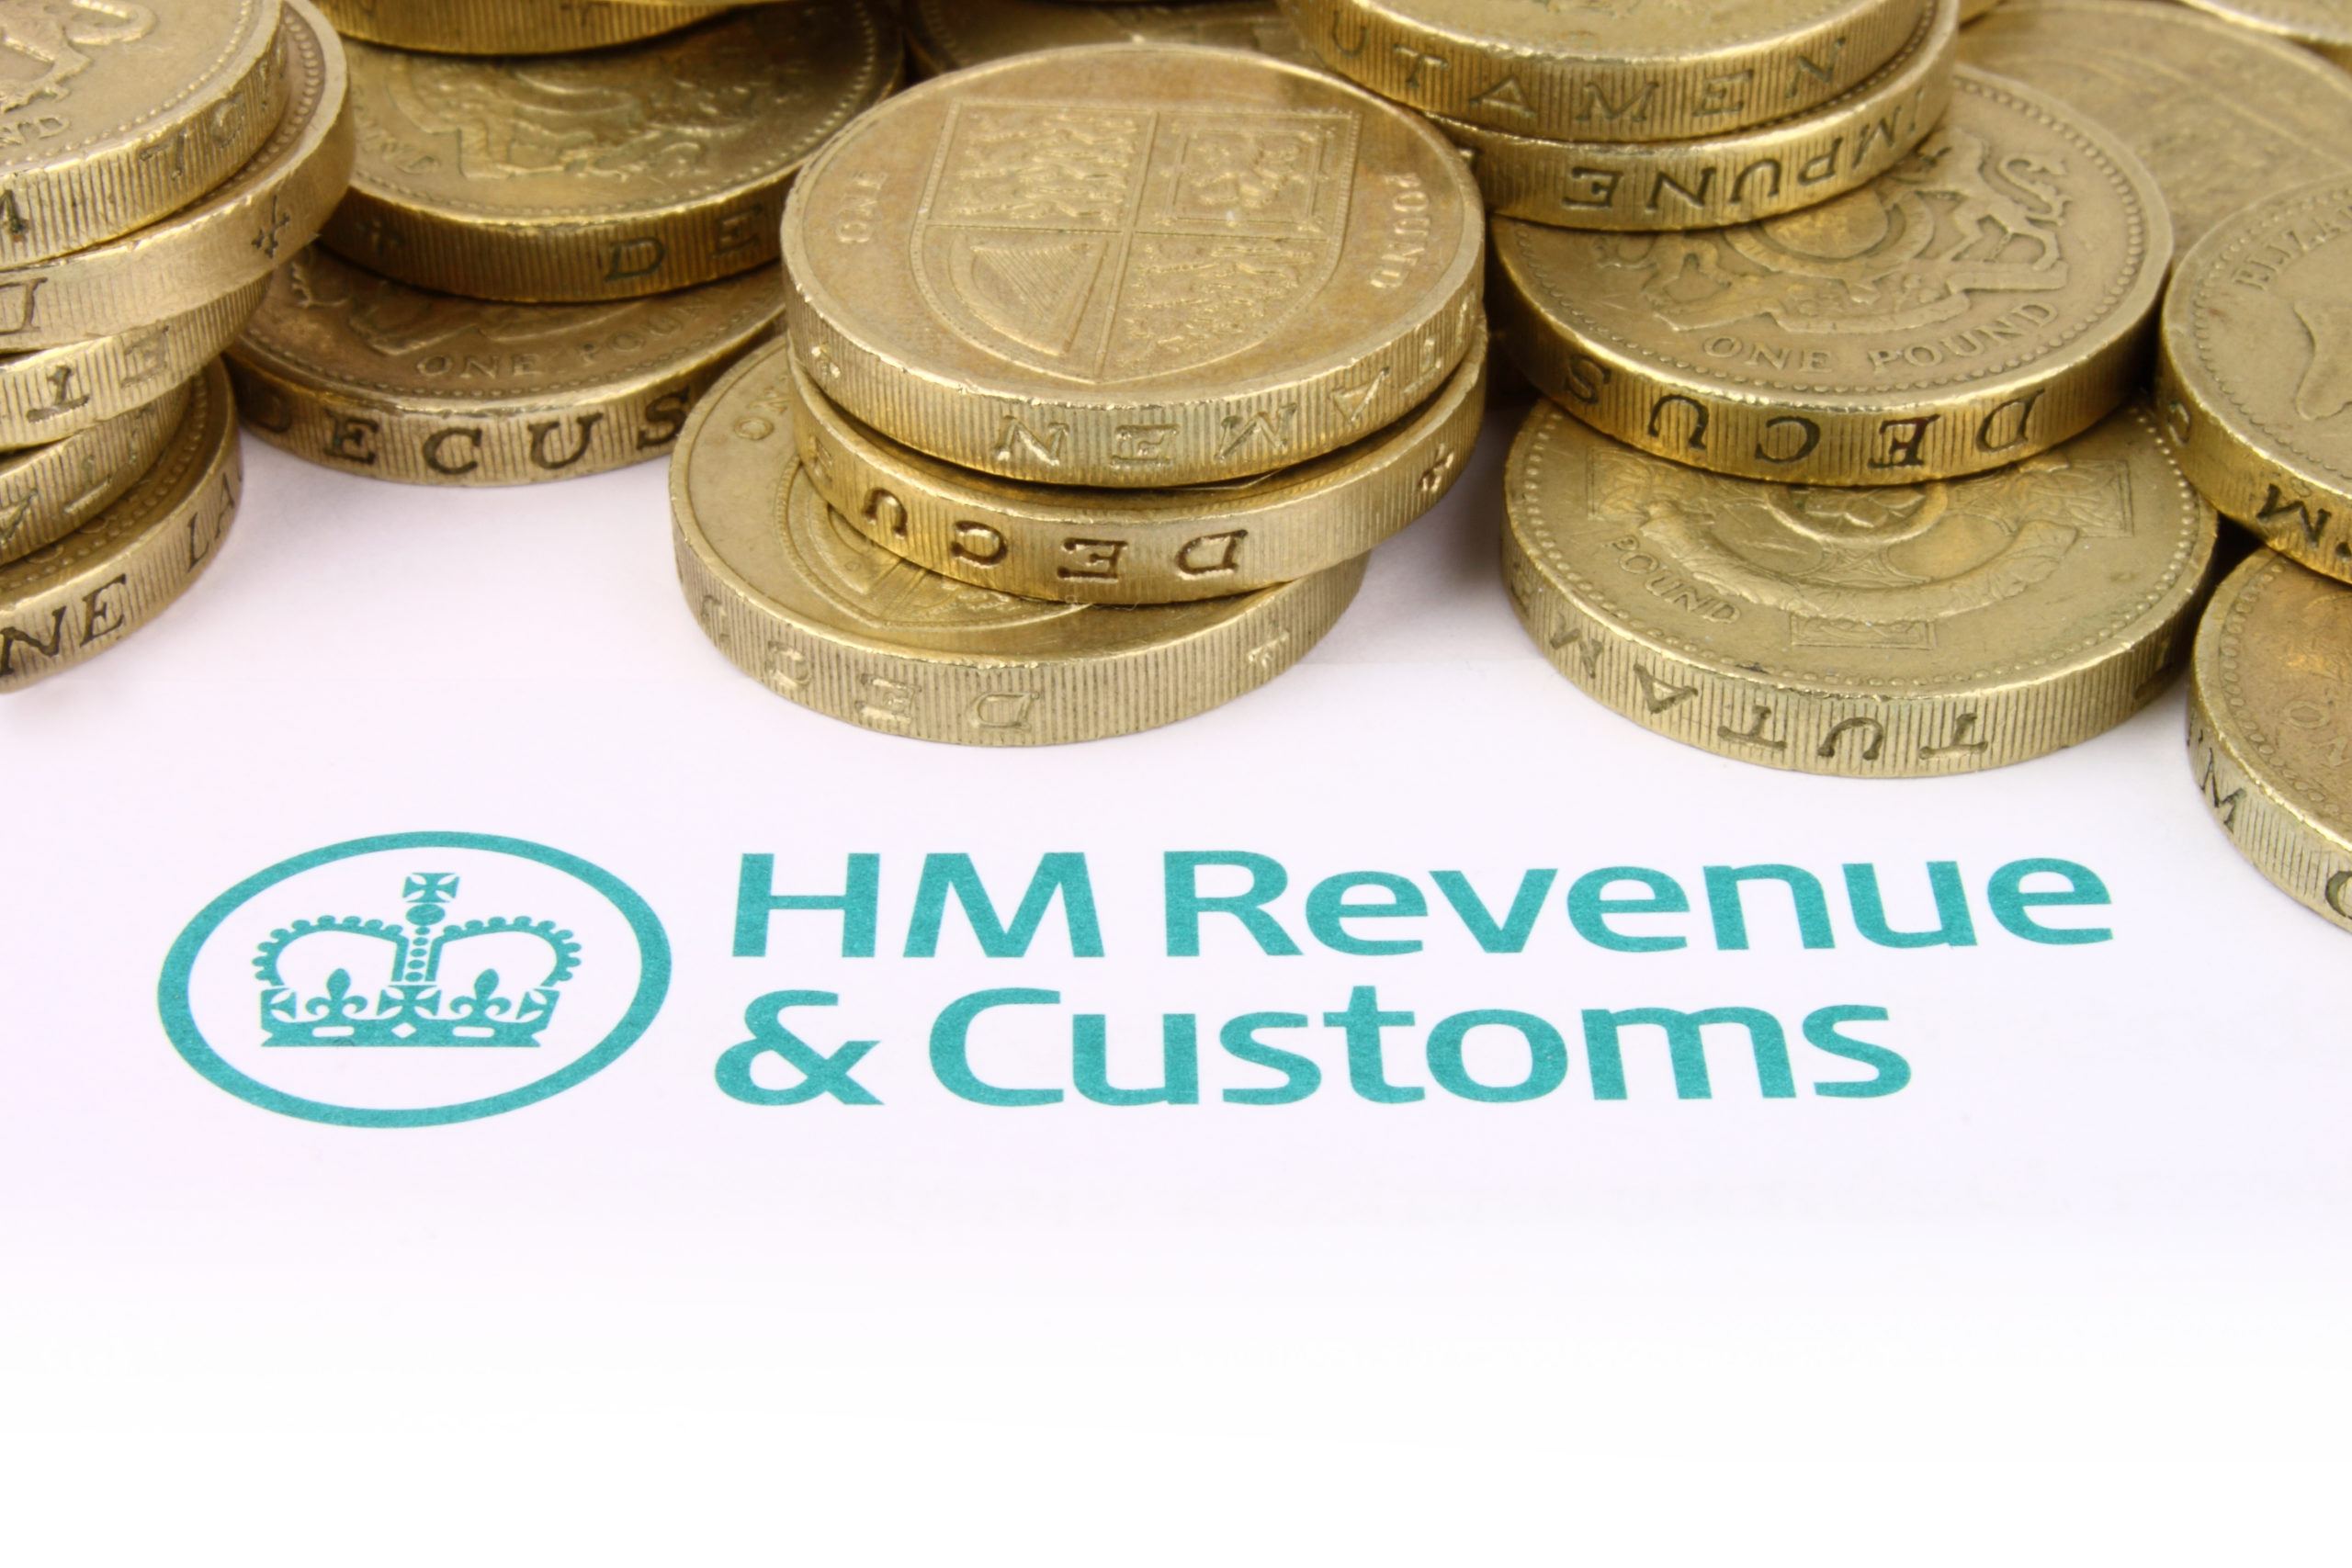 New HMRC Data Reveals Contribution Businesses Make To UK Tax Receipts 